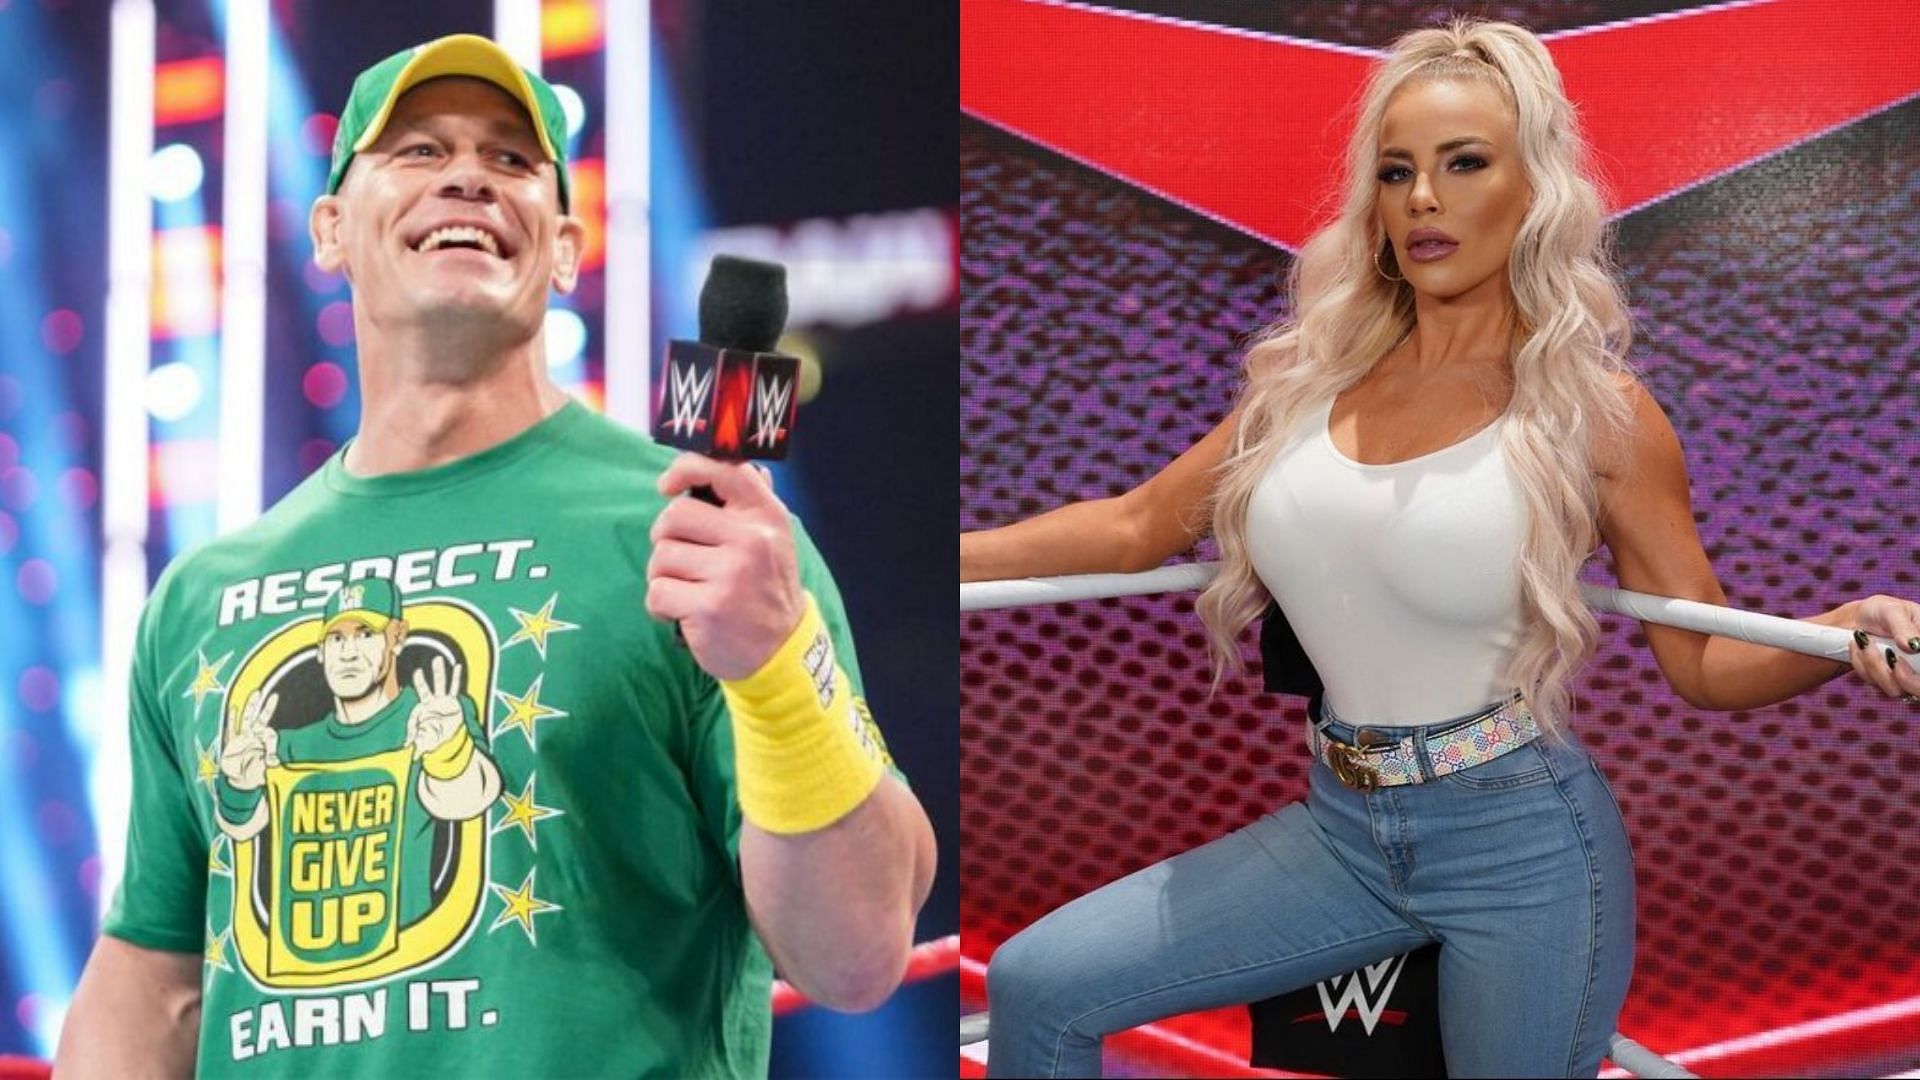 A WWE star has sent a message to Dana Brooke by referencing John Cena